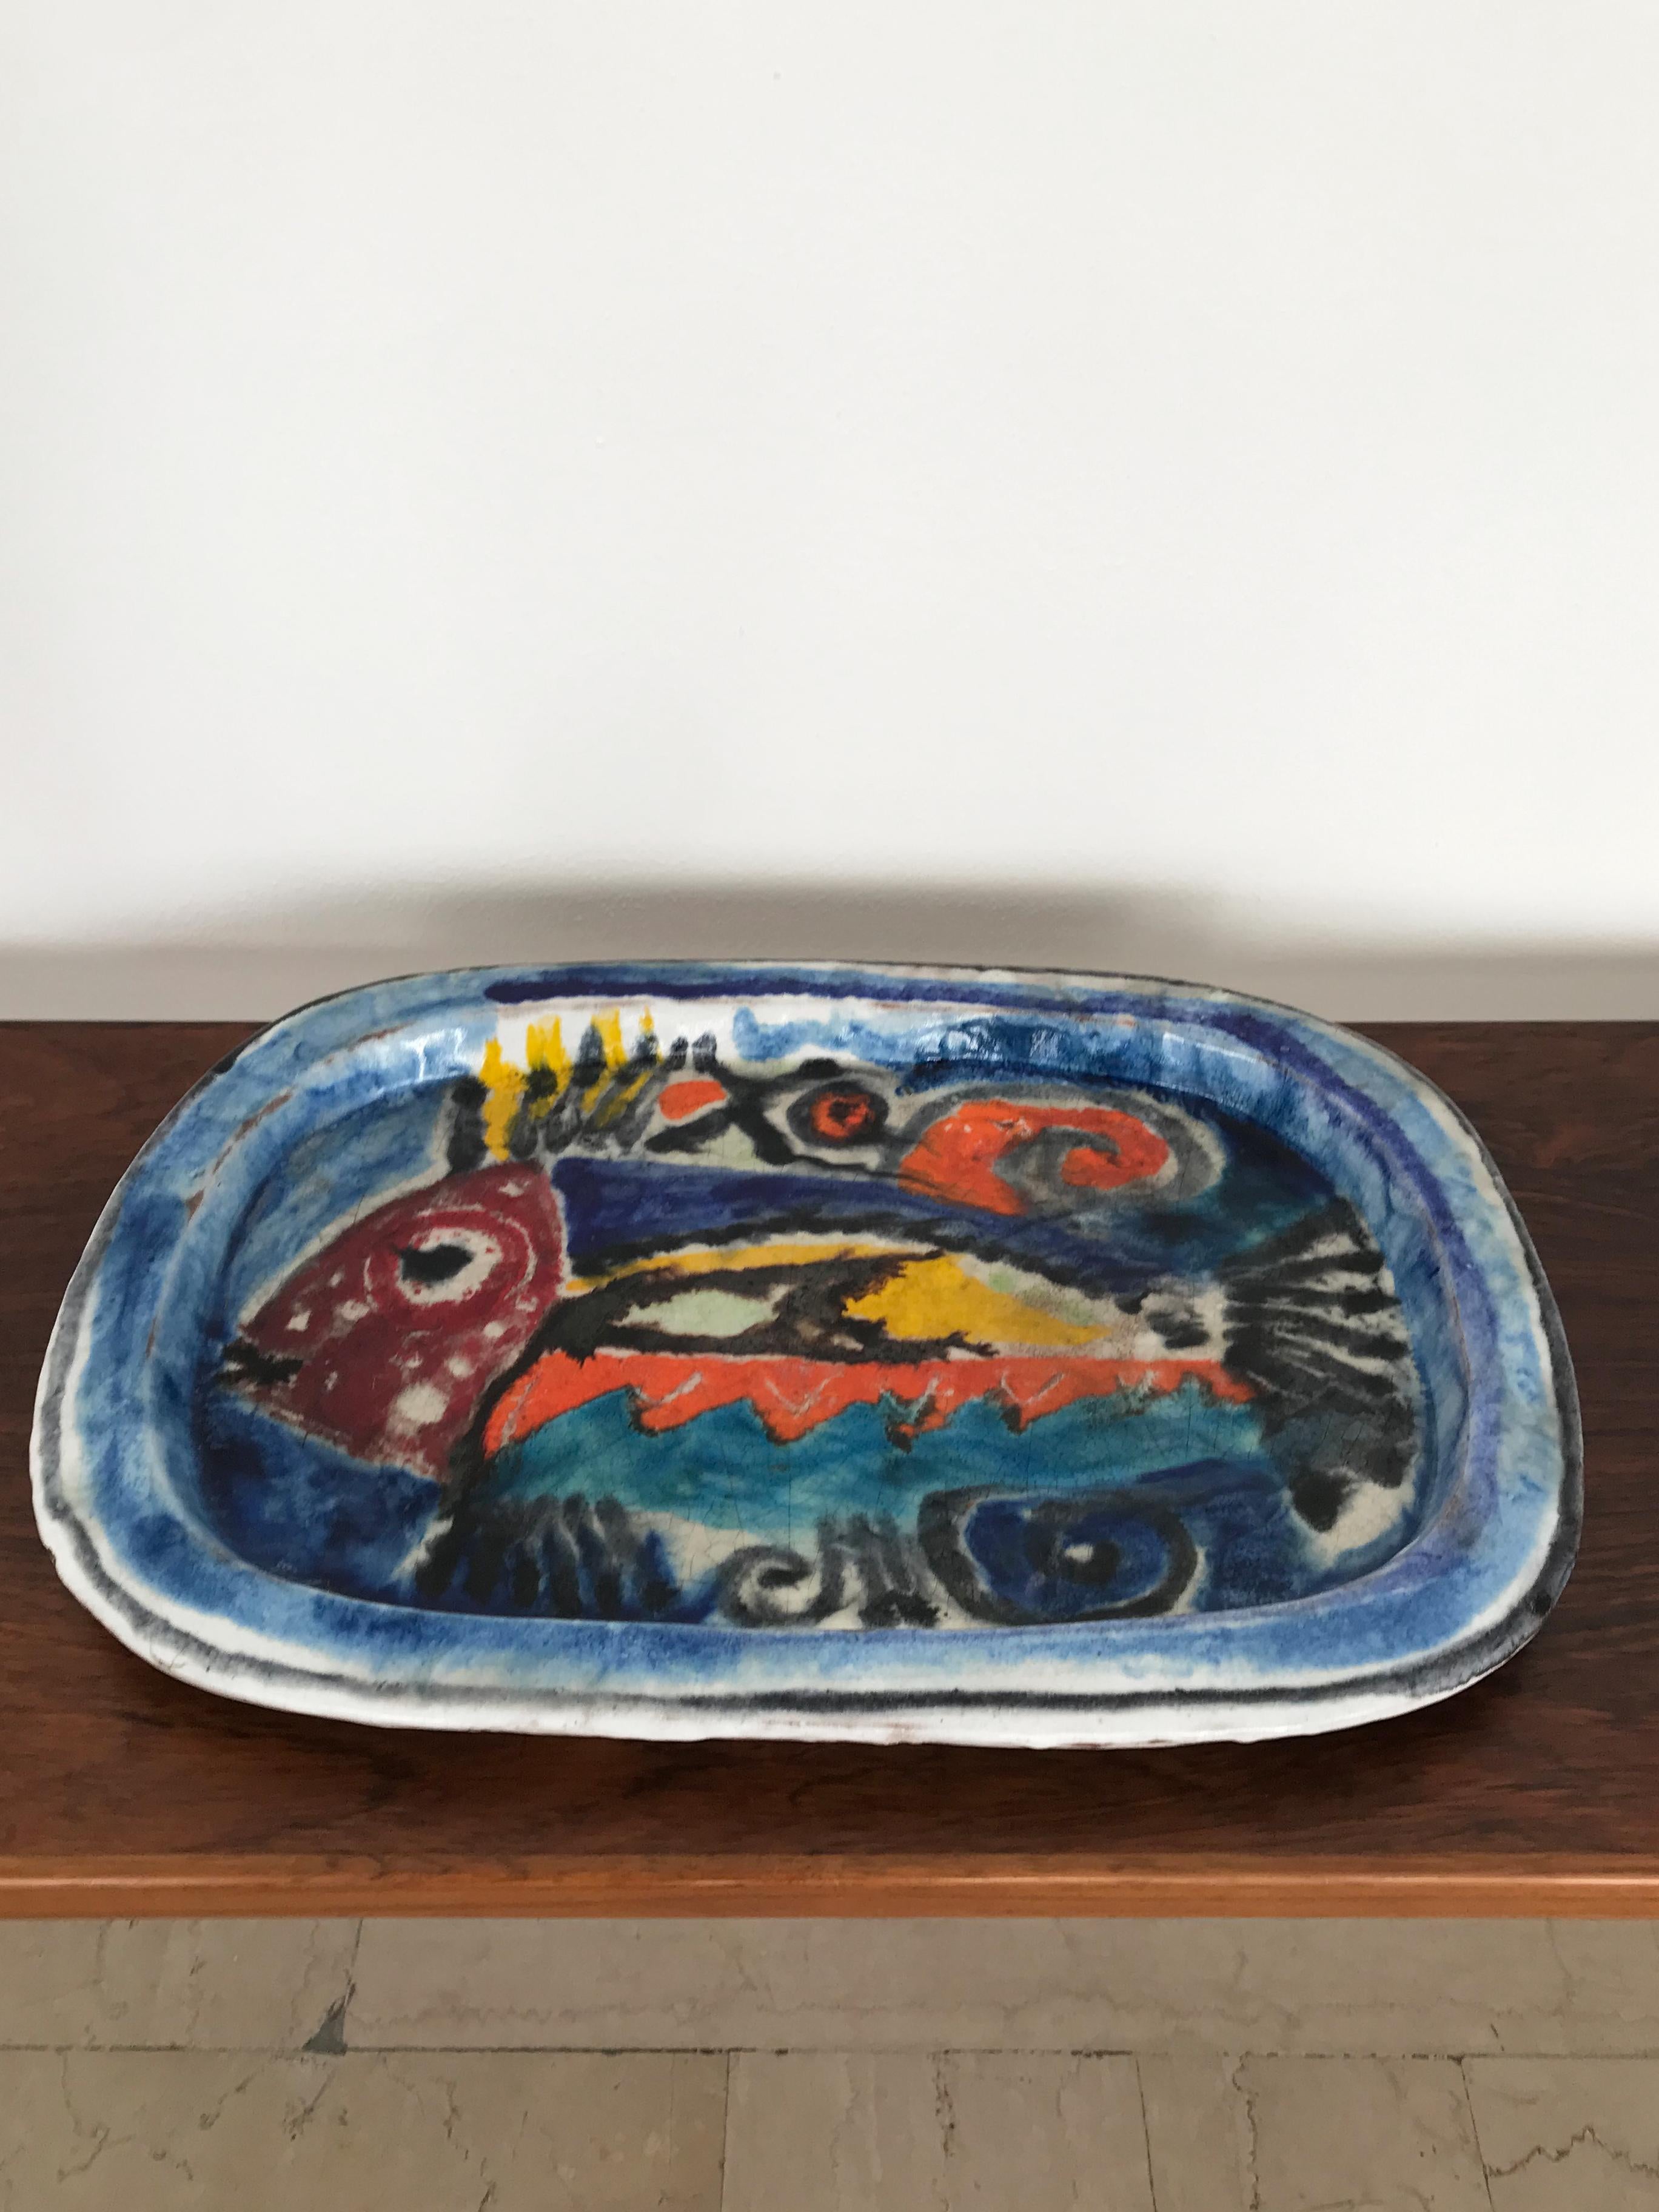 Decorative hand-decorated vintage modern ceramic wall plate or centerpiece, designed by Italian artist Giovanni De Simone and produced by his workshop,  note the worn manufacturer's adhesive label on the back, Italy 1950s

Giovanni De Simone (1930 -